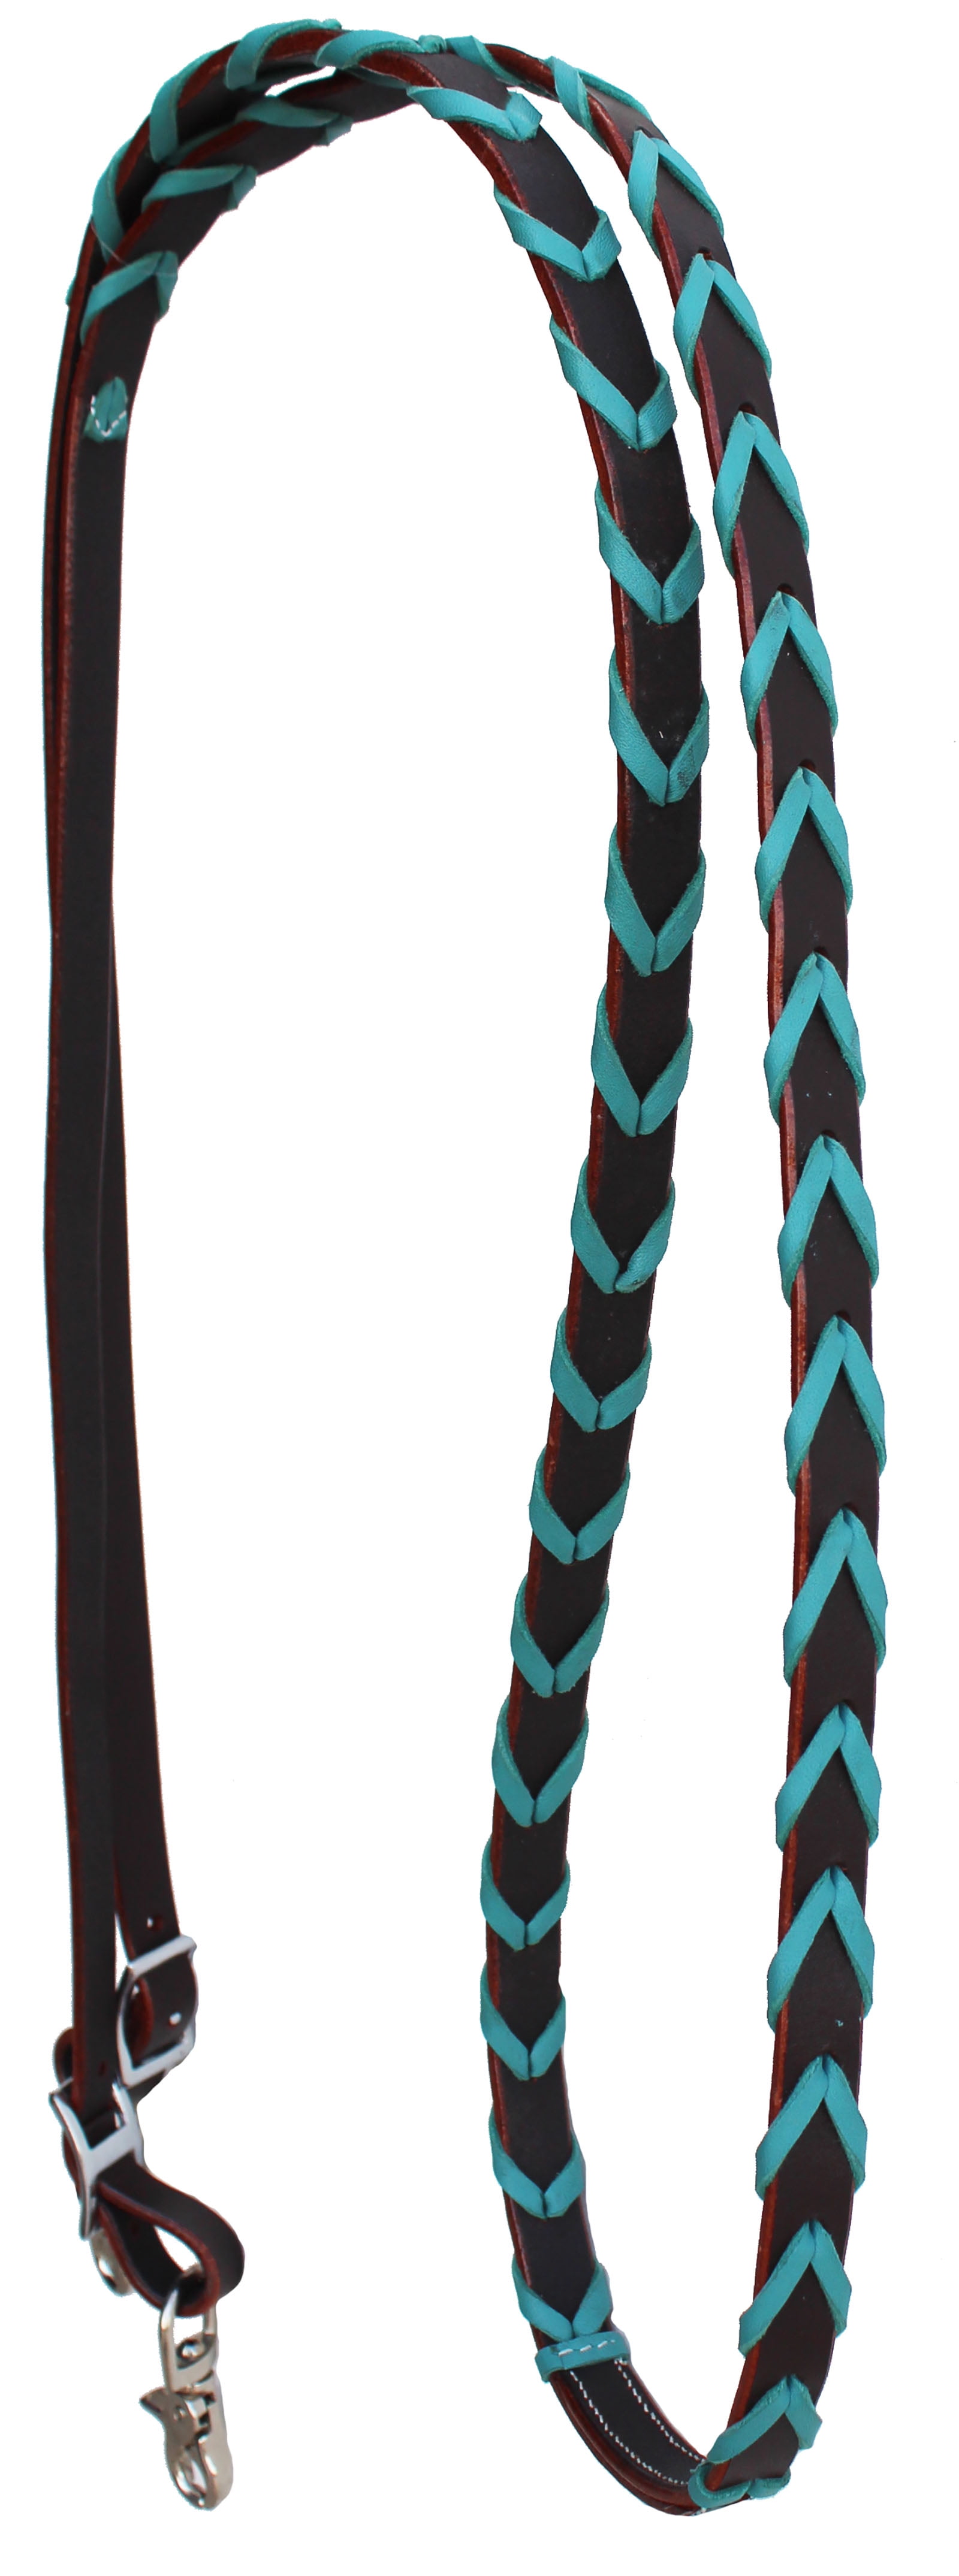 Equine Horse Western Leather Barrel Reins Tack Rodeo Nylon Laced Braided 6656 